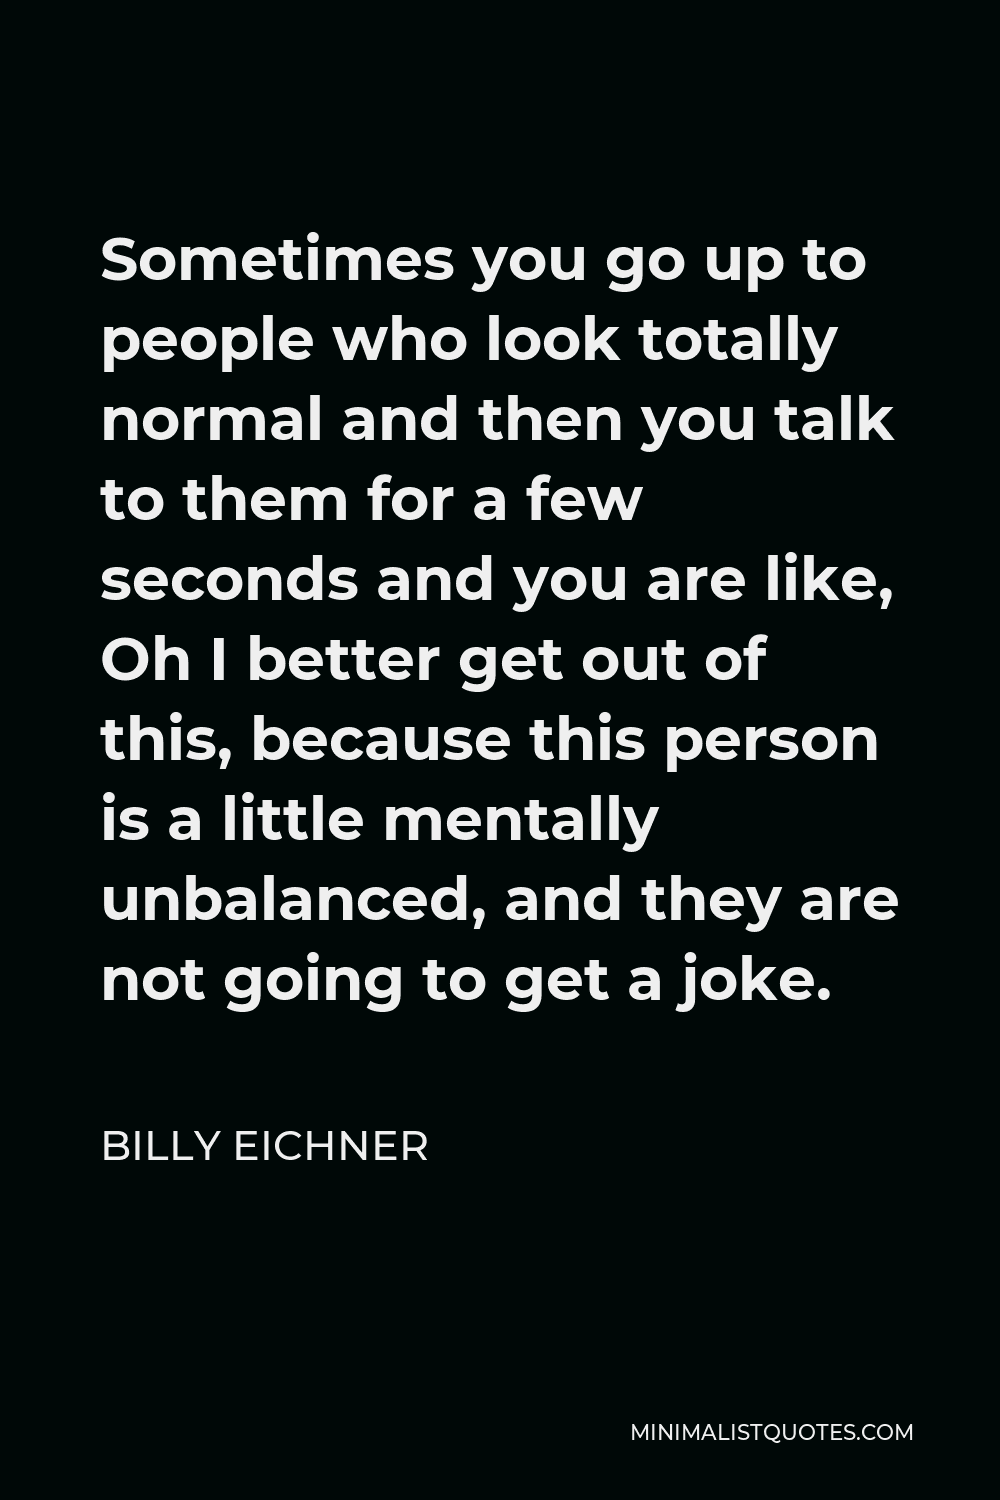 Billy Eichner Quote - Sometimes you go up to people who look totally normal and then you talk to them for a few seconds and you are like, Oh I better get out of this, because this person is a little mentally unbalanced, and they are not going to get a joke.